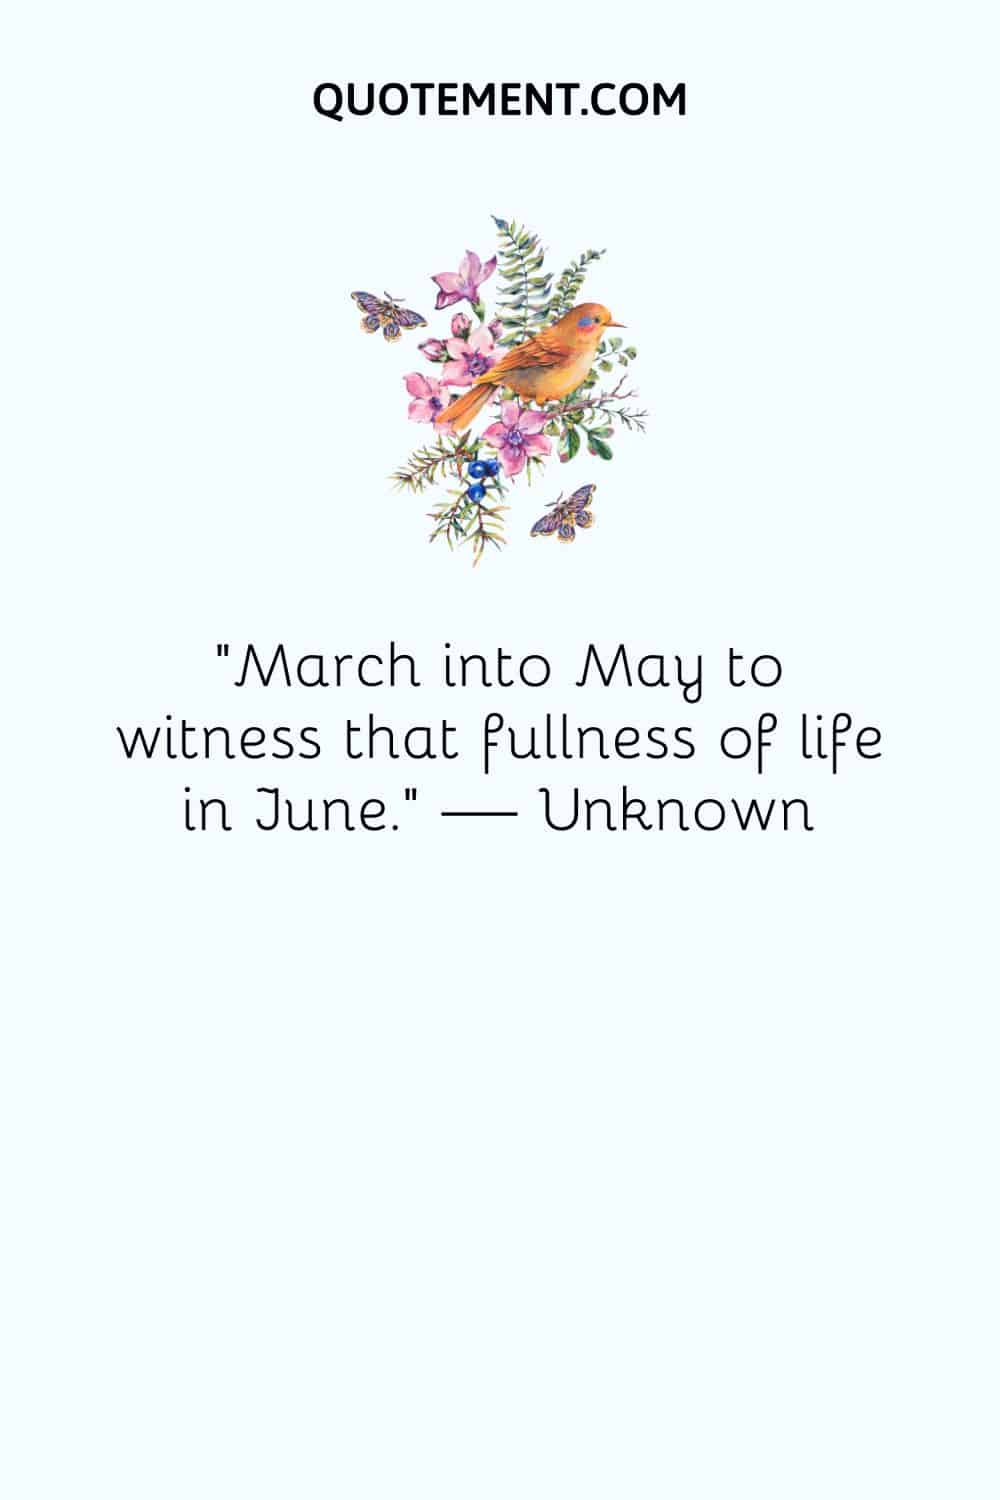 “March into May to witness that fullness of life in June.” — Unknown